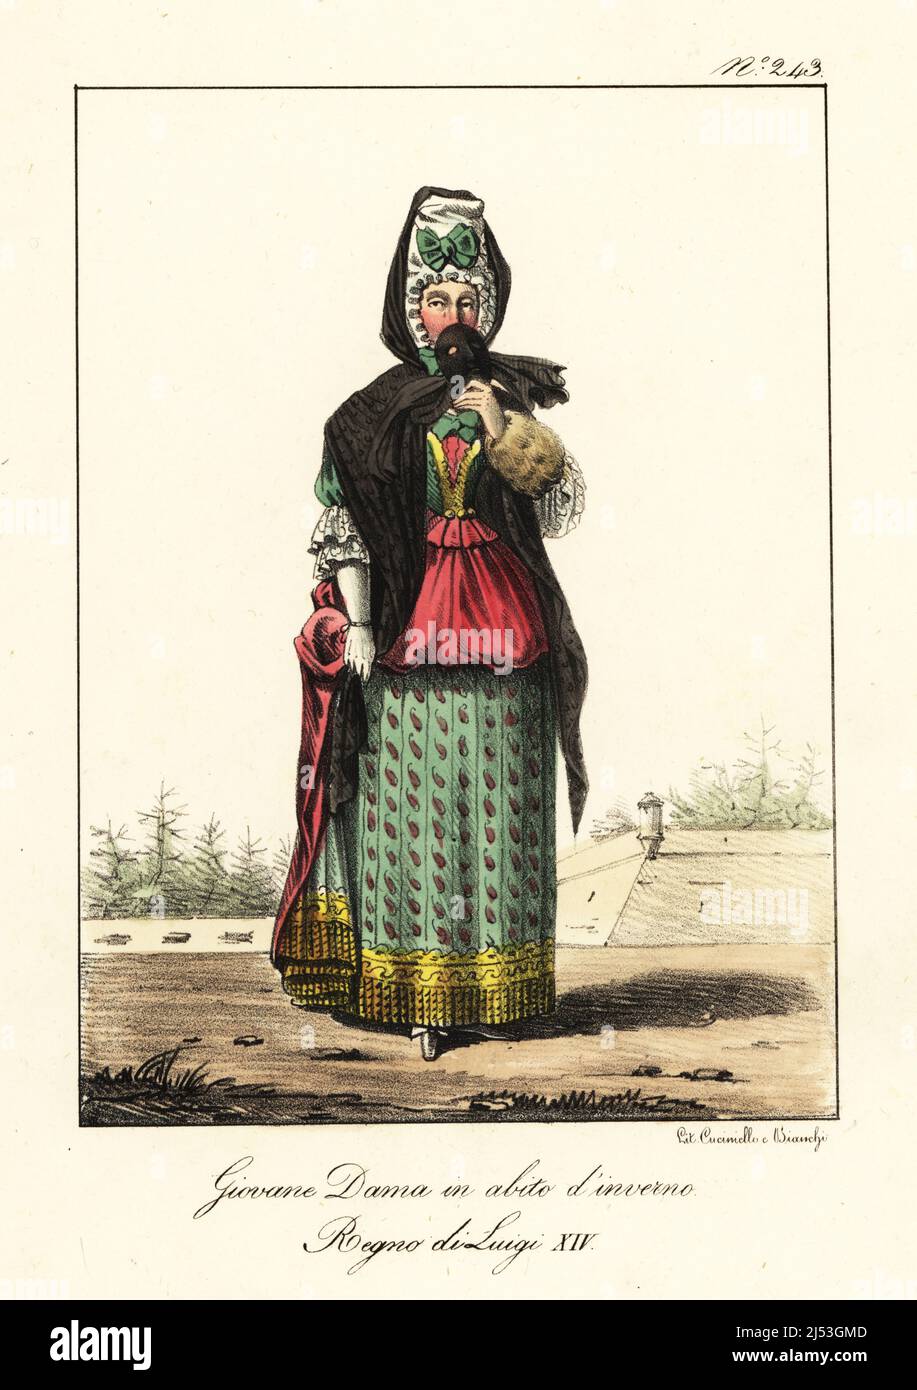 Young woman in winter outfit, 17th century. Black shawl worn over a tall bonnet, green and crimson gown, holding a masquerade mask. printed petticoat. Jeune Dame en Costume d'Hiver. Regne de Louis XIV. Handcoloured lithograph by Lorenzo Bianchi and Domenico Cuciniello after Hippolyte Lecomte from Costumi civili e militari della monarchia francese dal 1200 al 1820, Naples, 1825. Italian edition of Lecomte’s Civilian and military costumes of the French monarchy from 1200 to 1820. Stock Photo